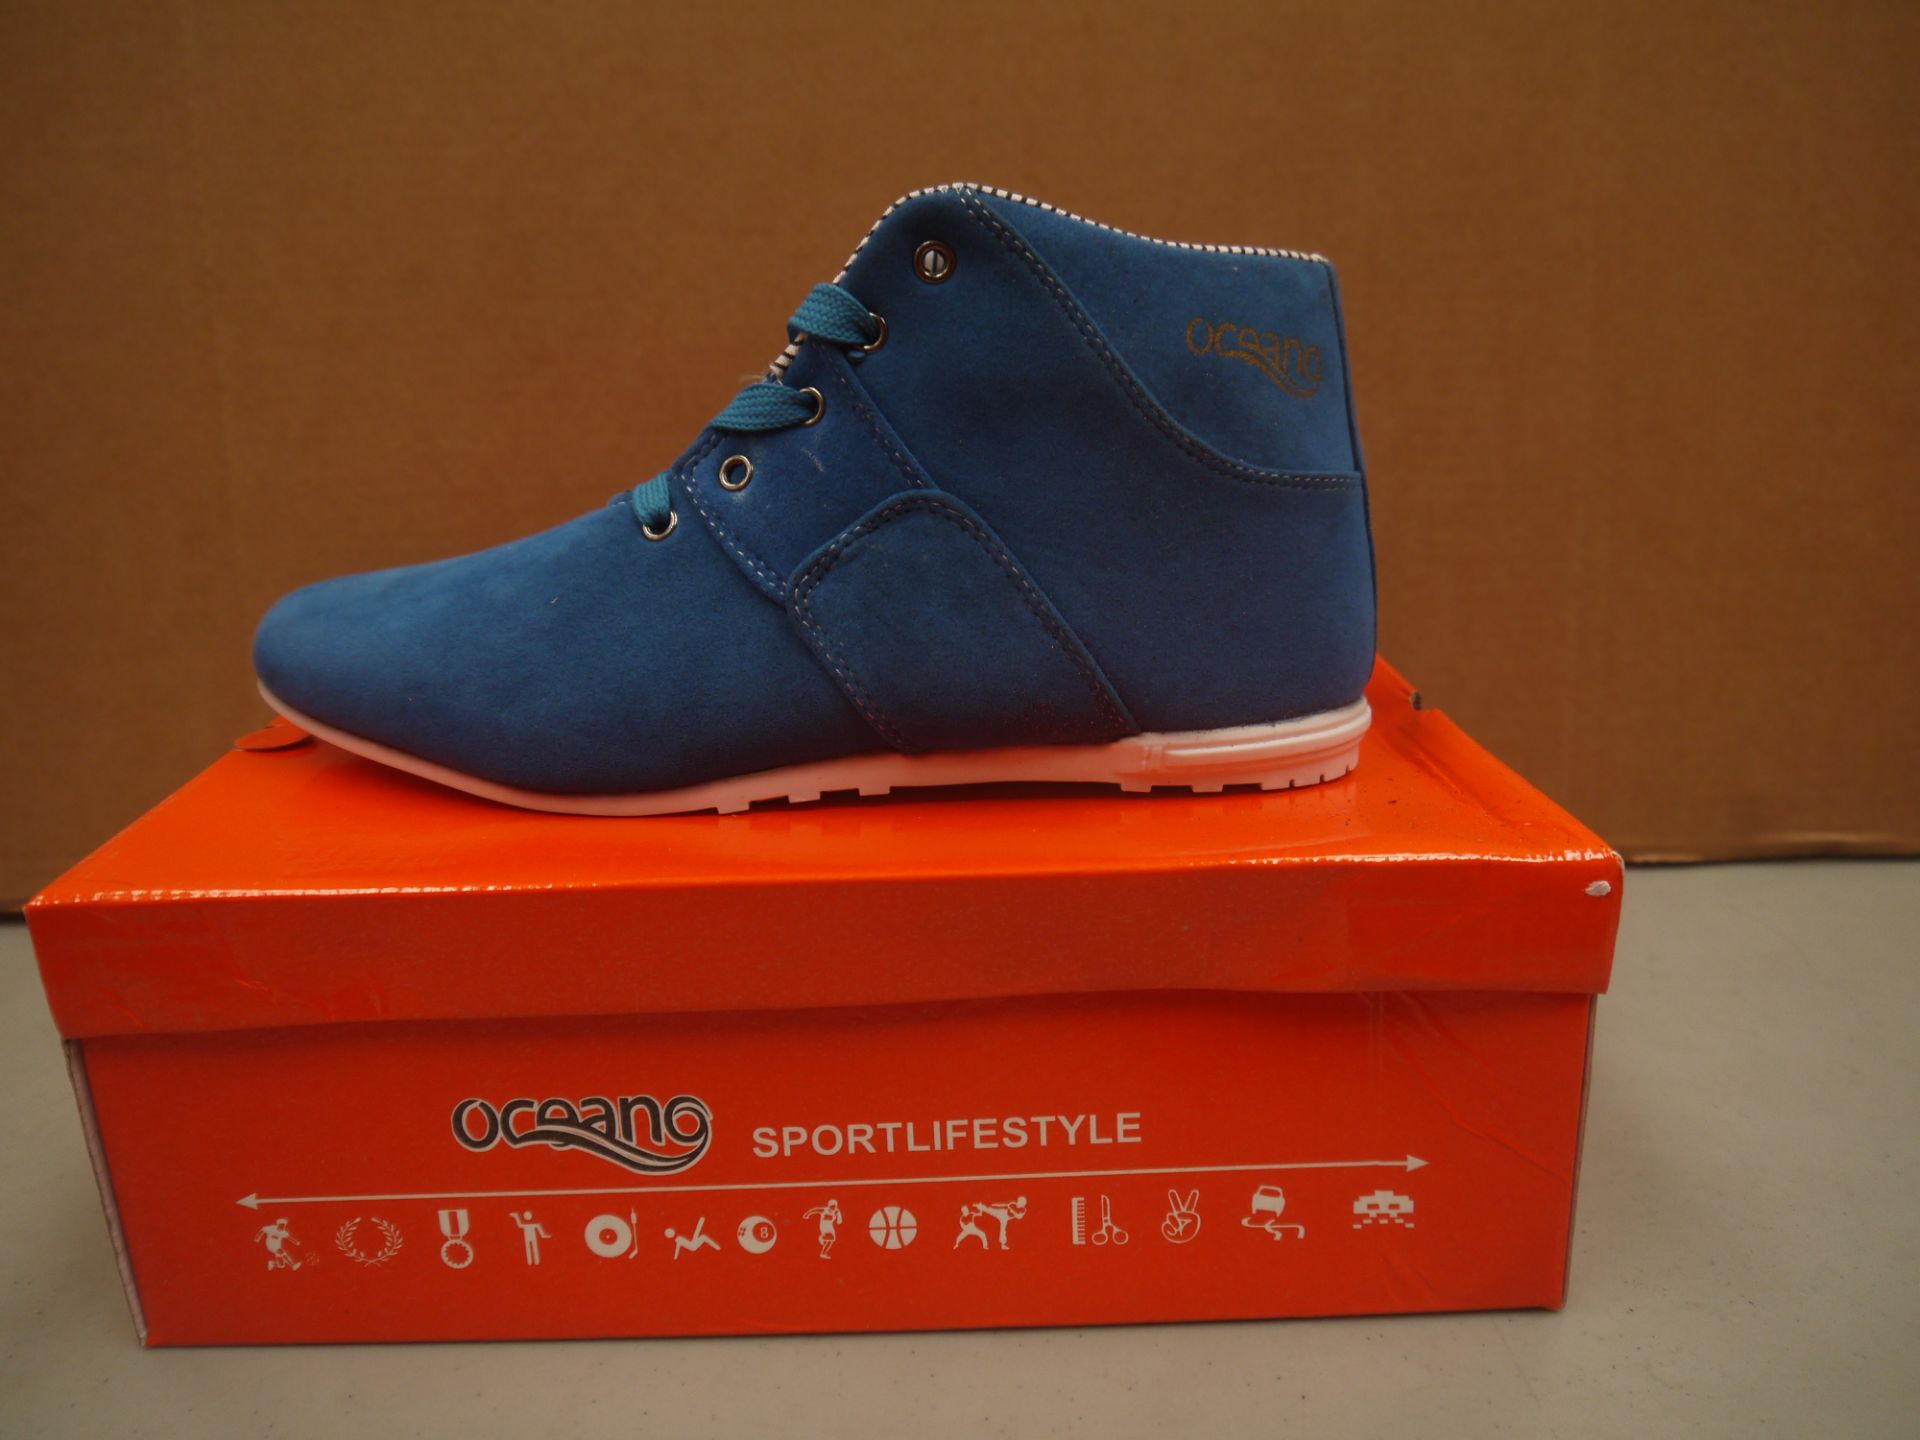 Mens Blue Suede Oceano trainer style boot new and boxed size UK8